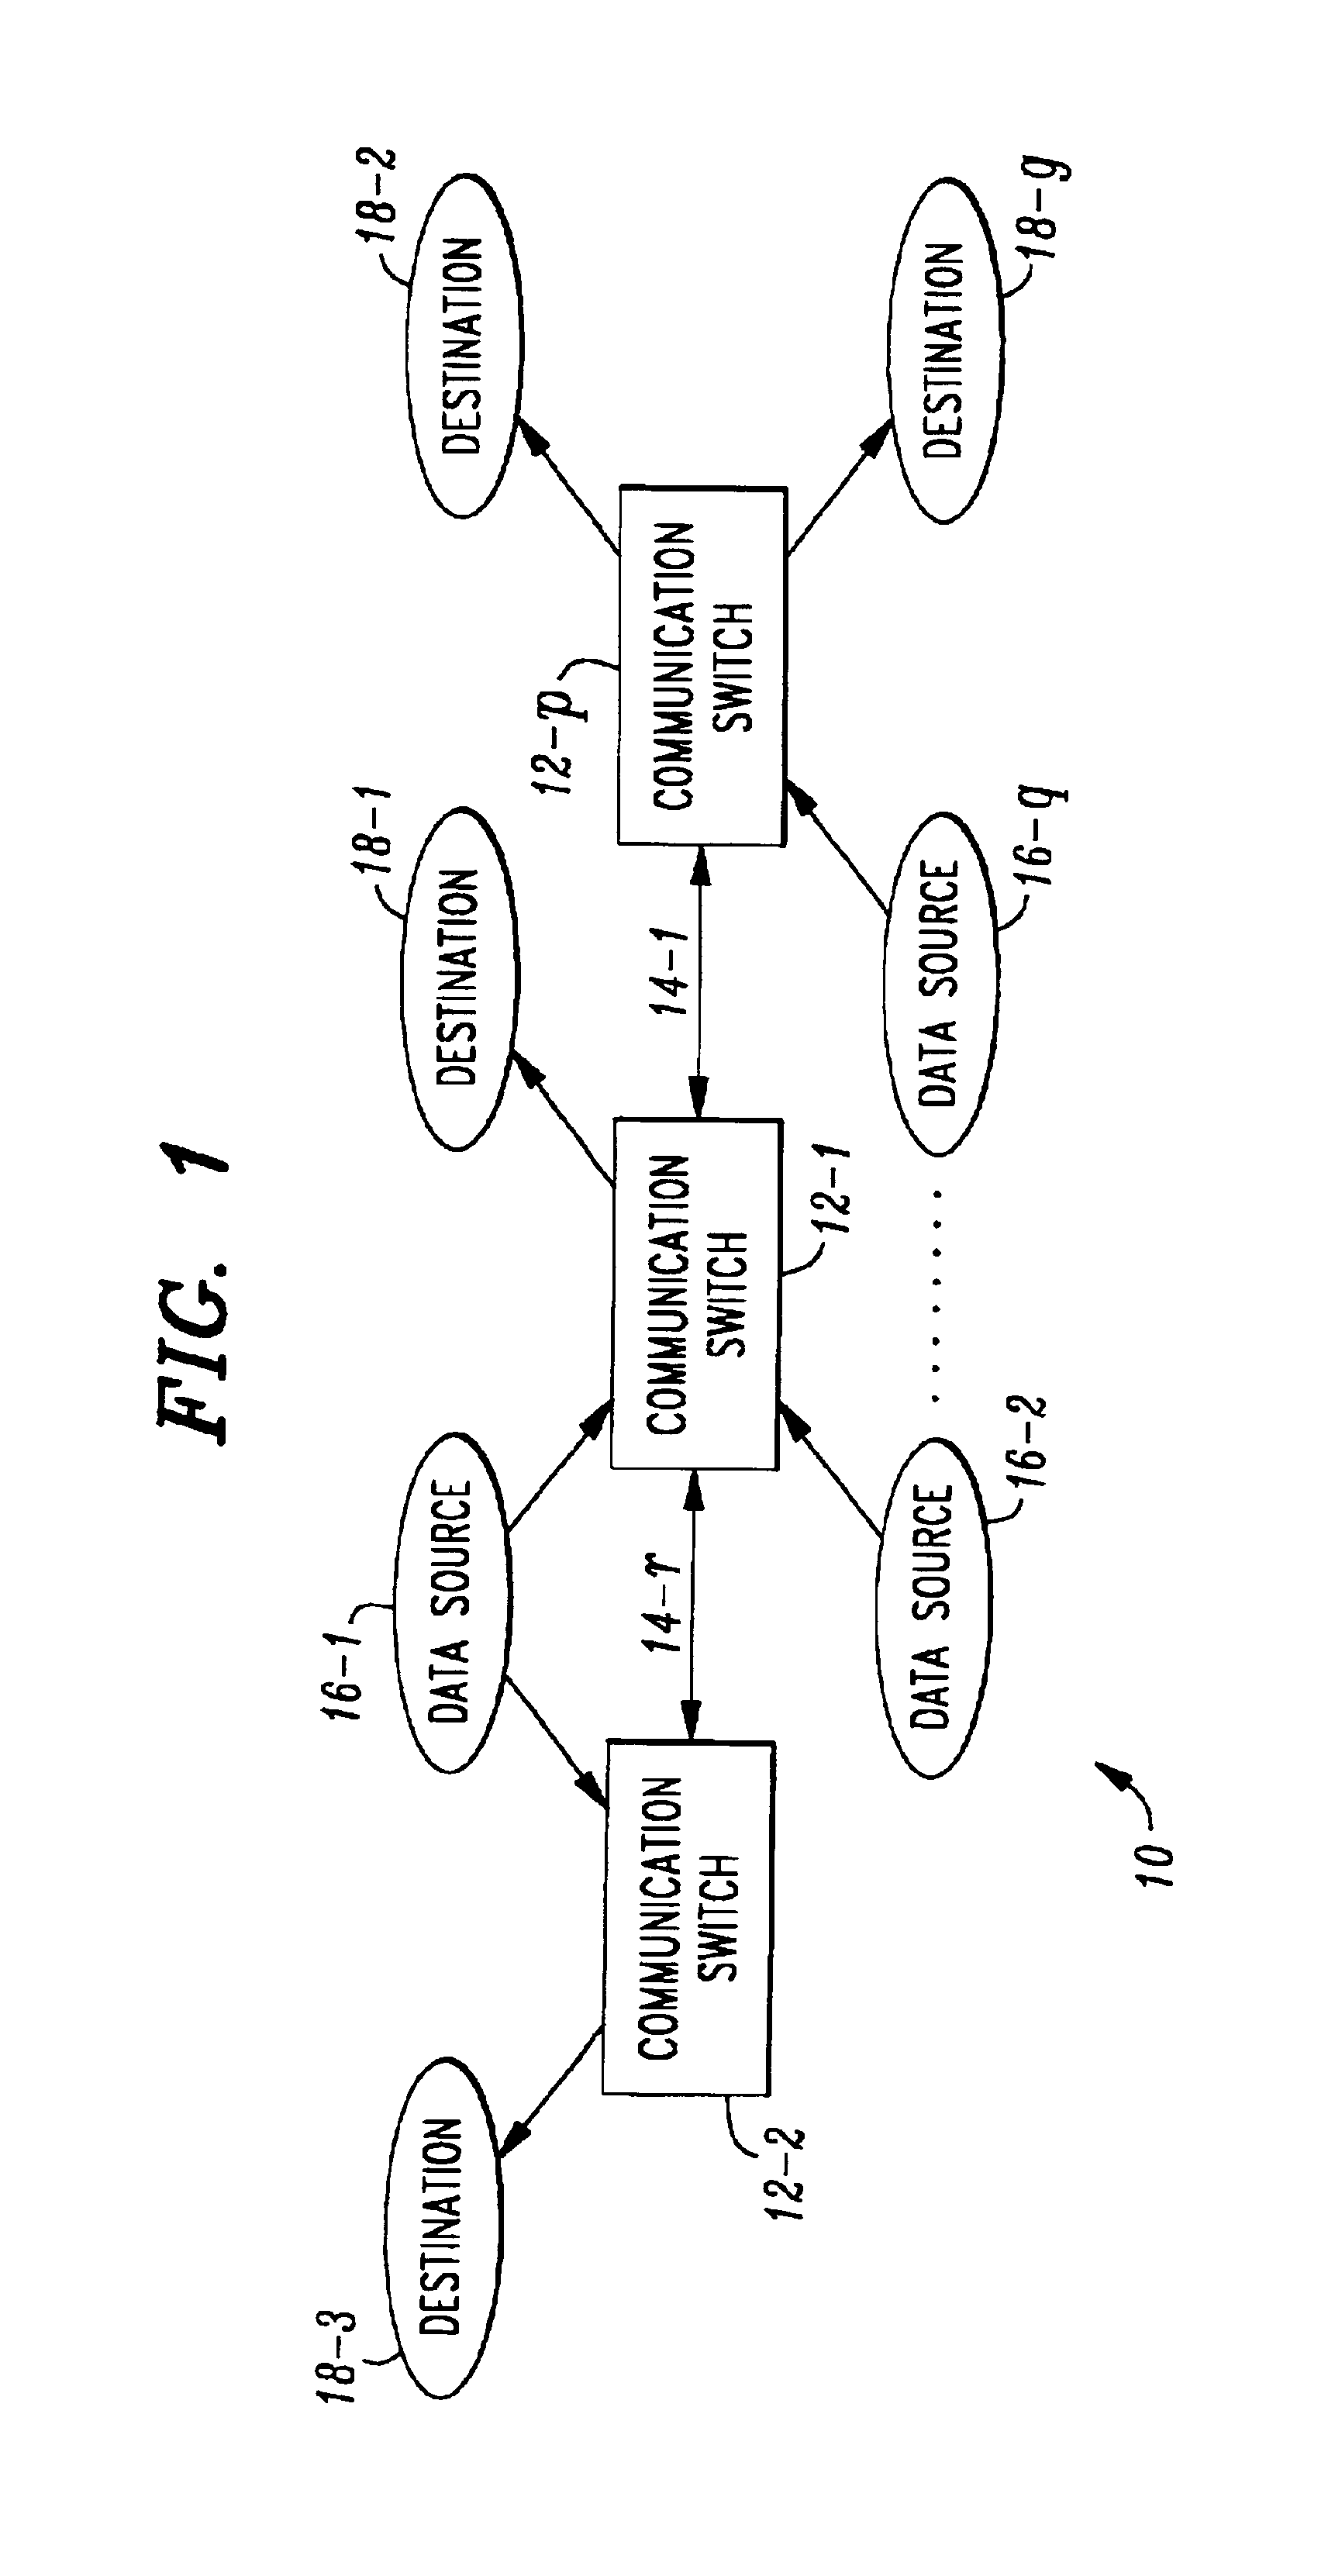 Method and apparatus for guaranteeing data transfer rates and enforcing conformance with traffic profiles in a packet network